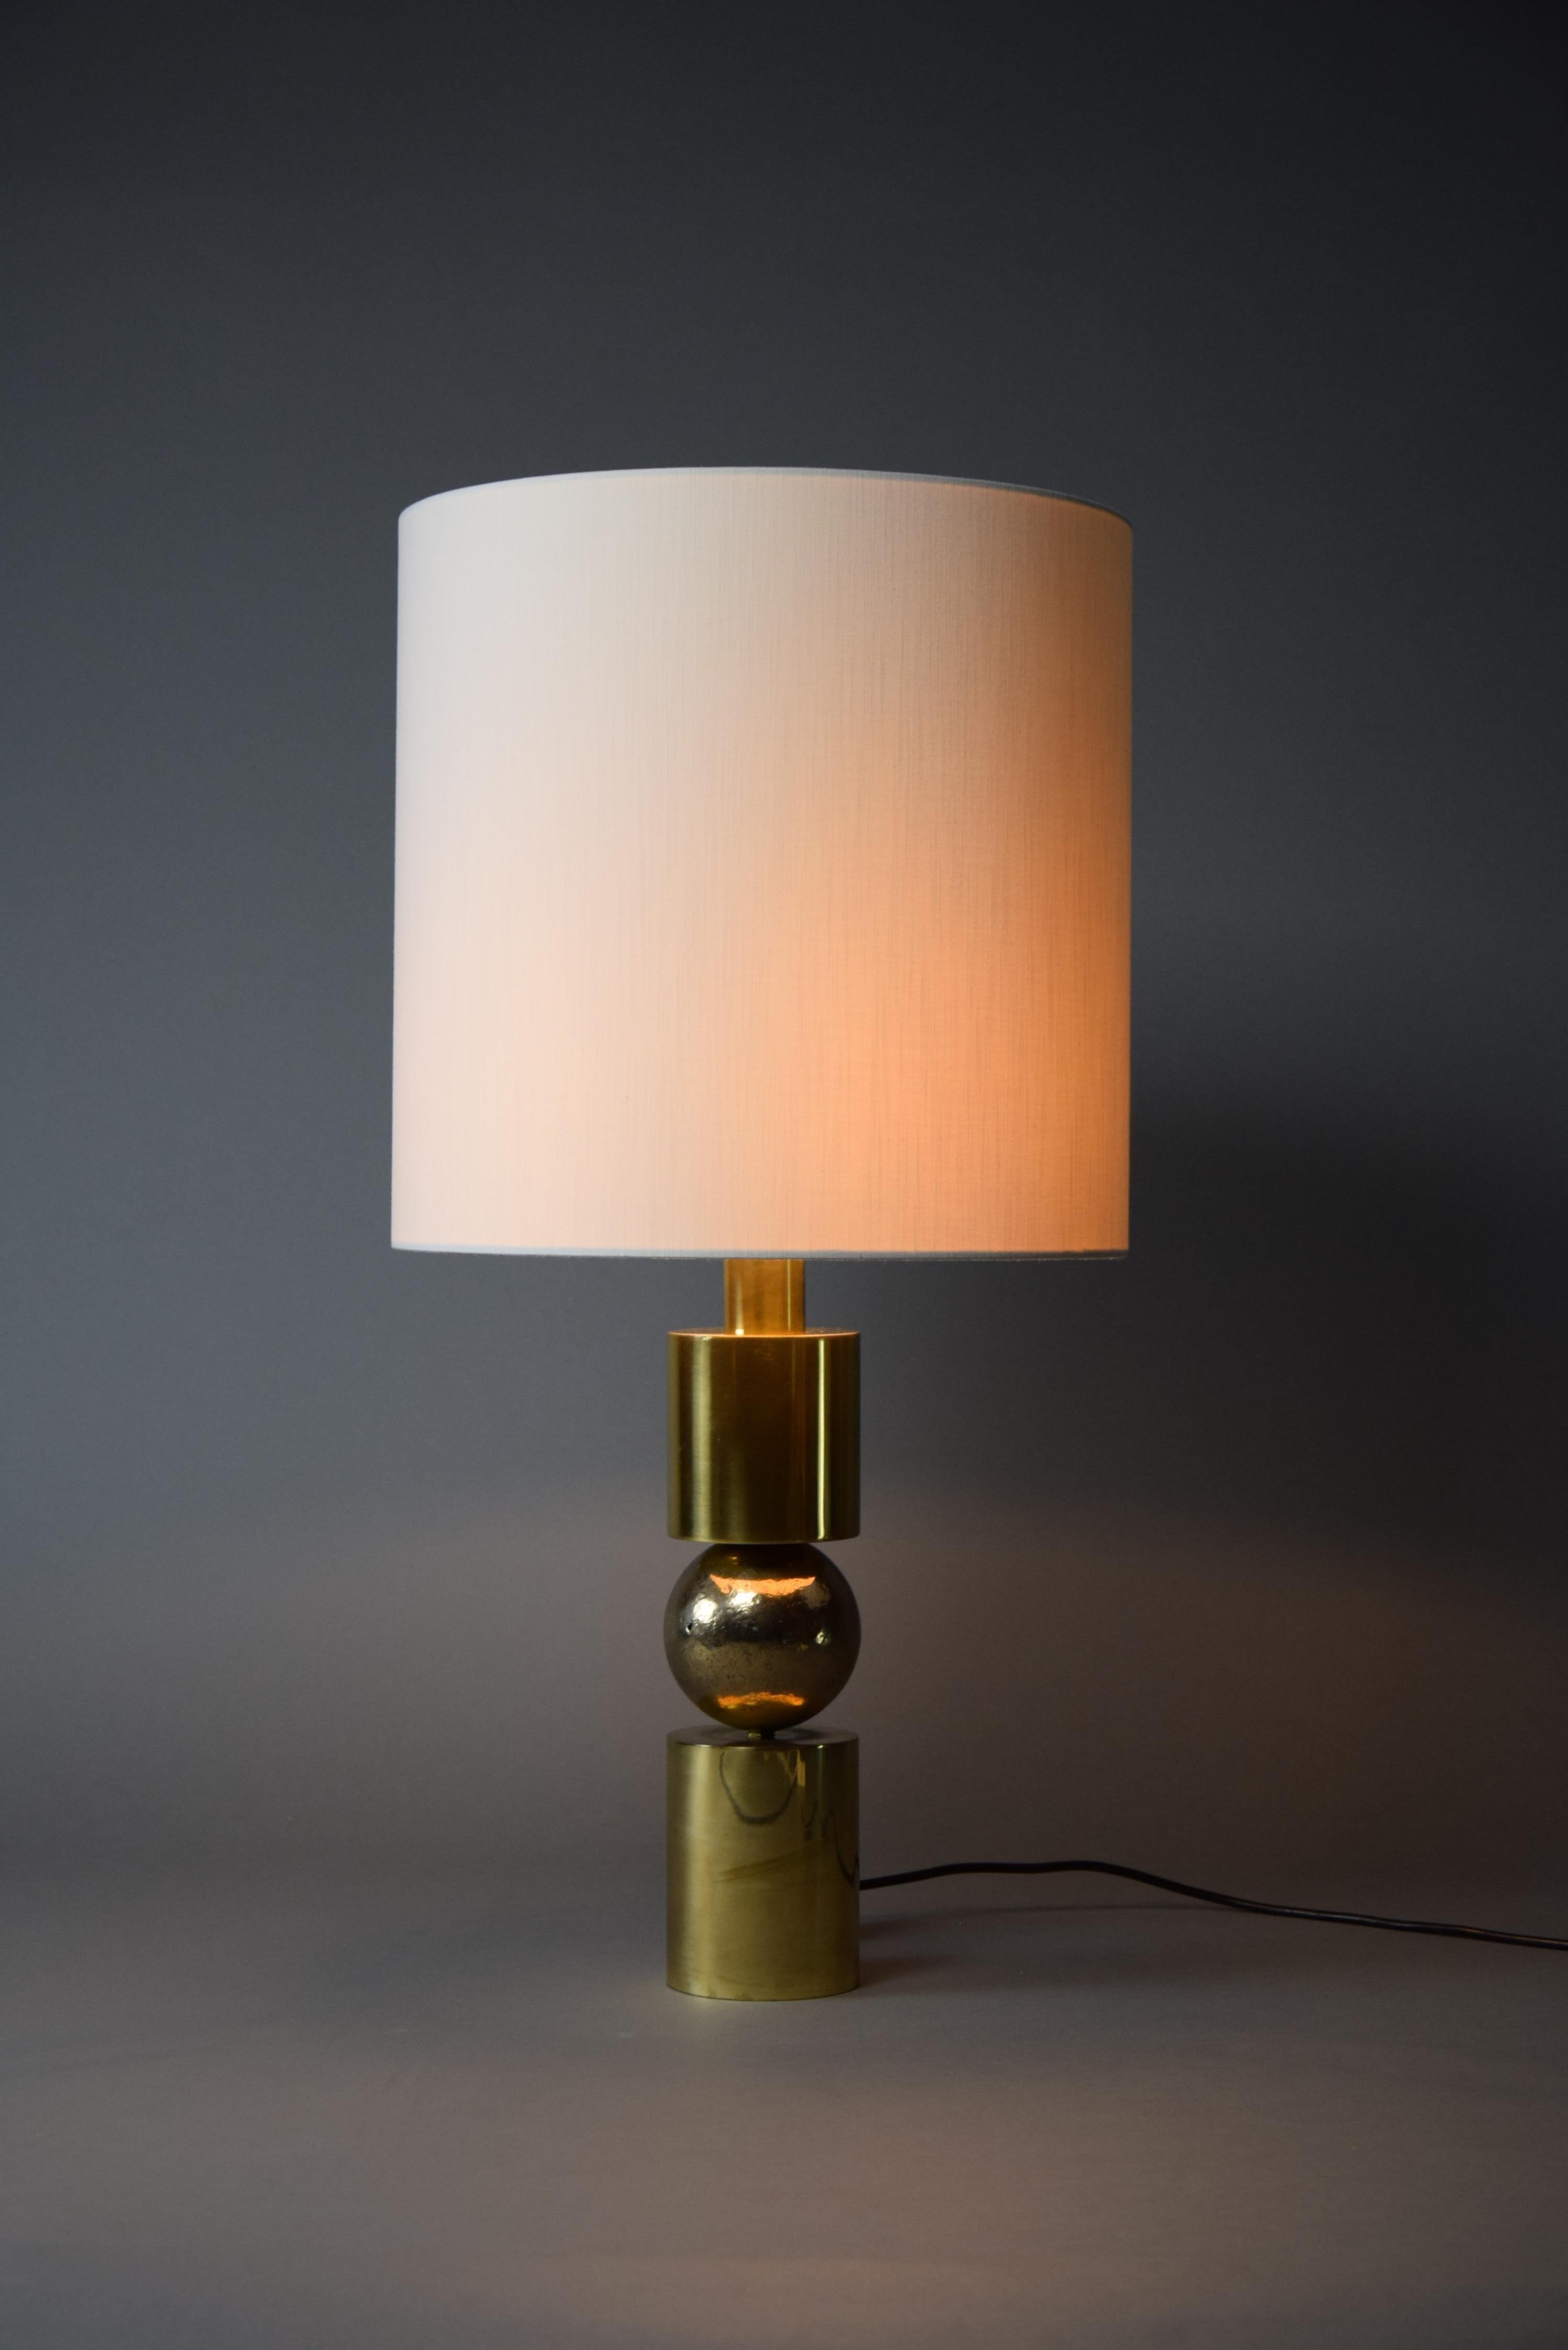 Mid-20th Century Italian Late 1960s Brass Table Lamp with Ivory Colored Shade For Sale